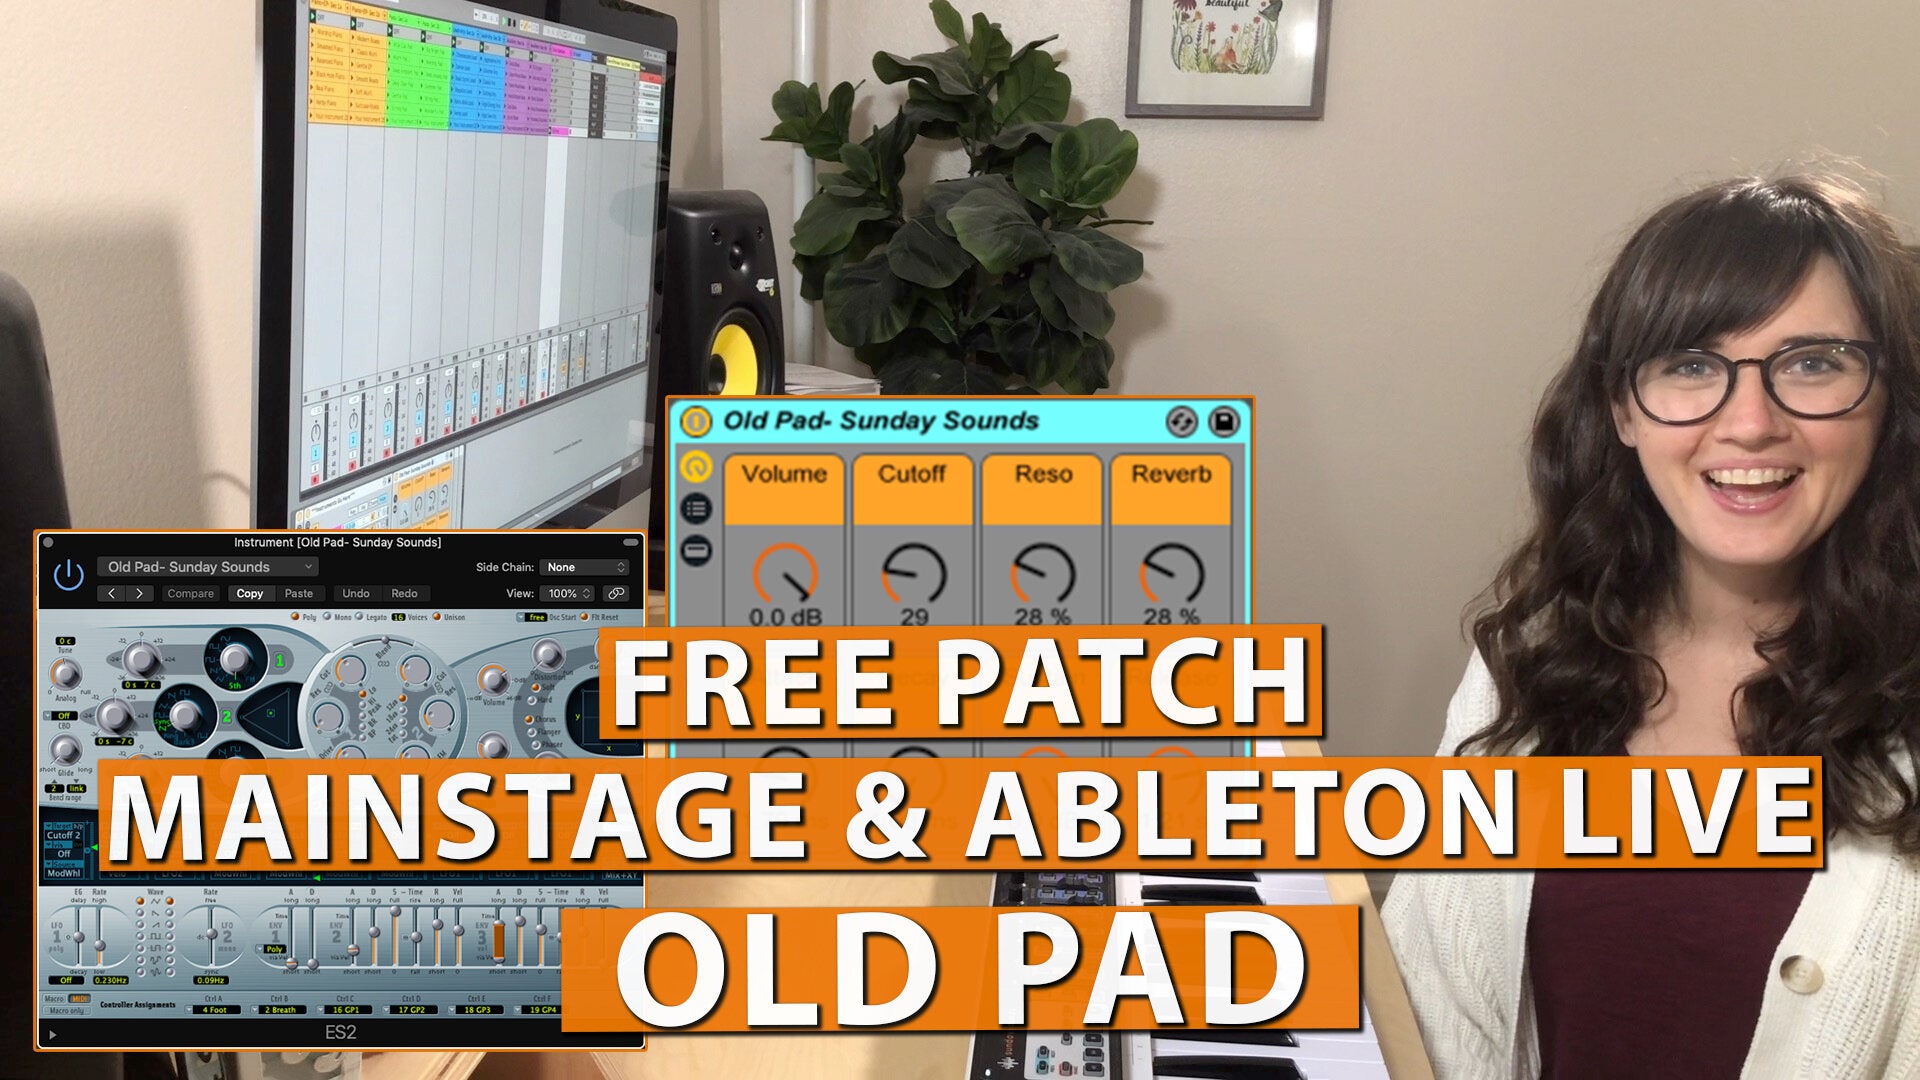 Free MainStage & Ableton Worship Patch! - Old Pad